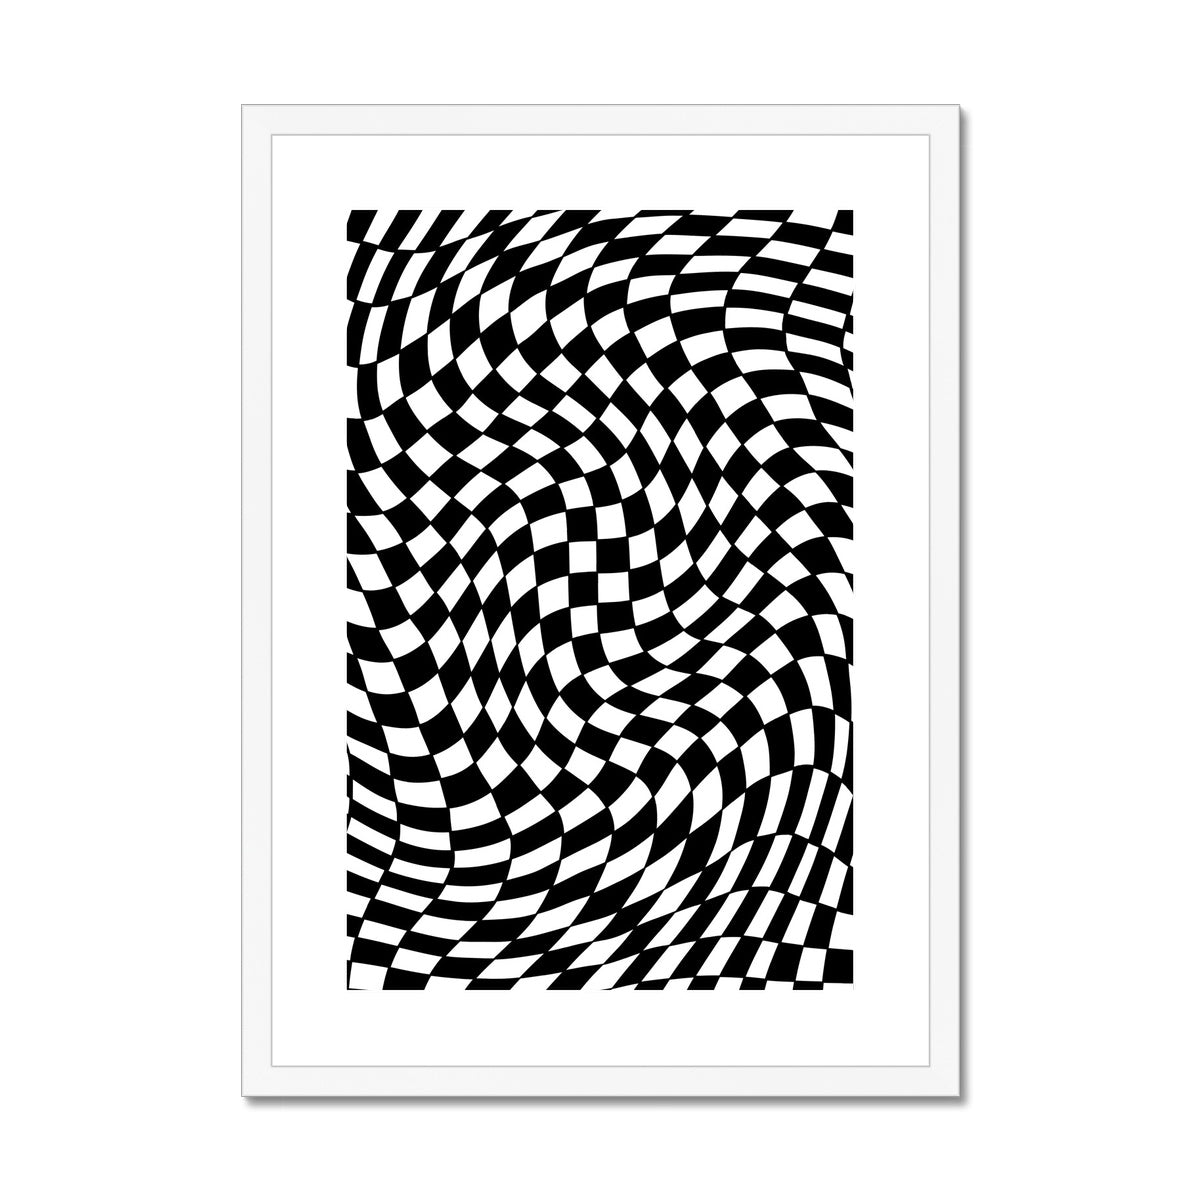 © les muses / Danish pastel art prints full of psychedelic wavy checkers.
Retro warped checker posters in dreamy pastels perfect for funky apartment or trendy dorm decor. 